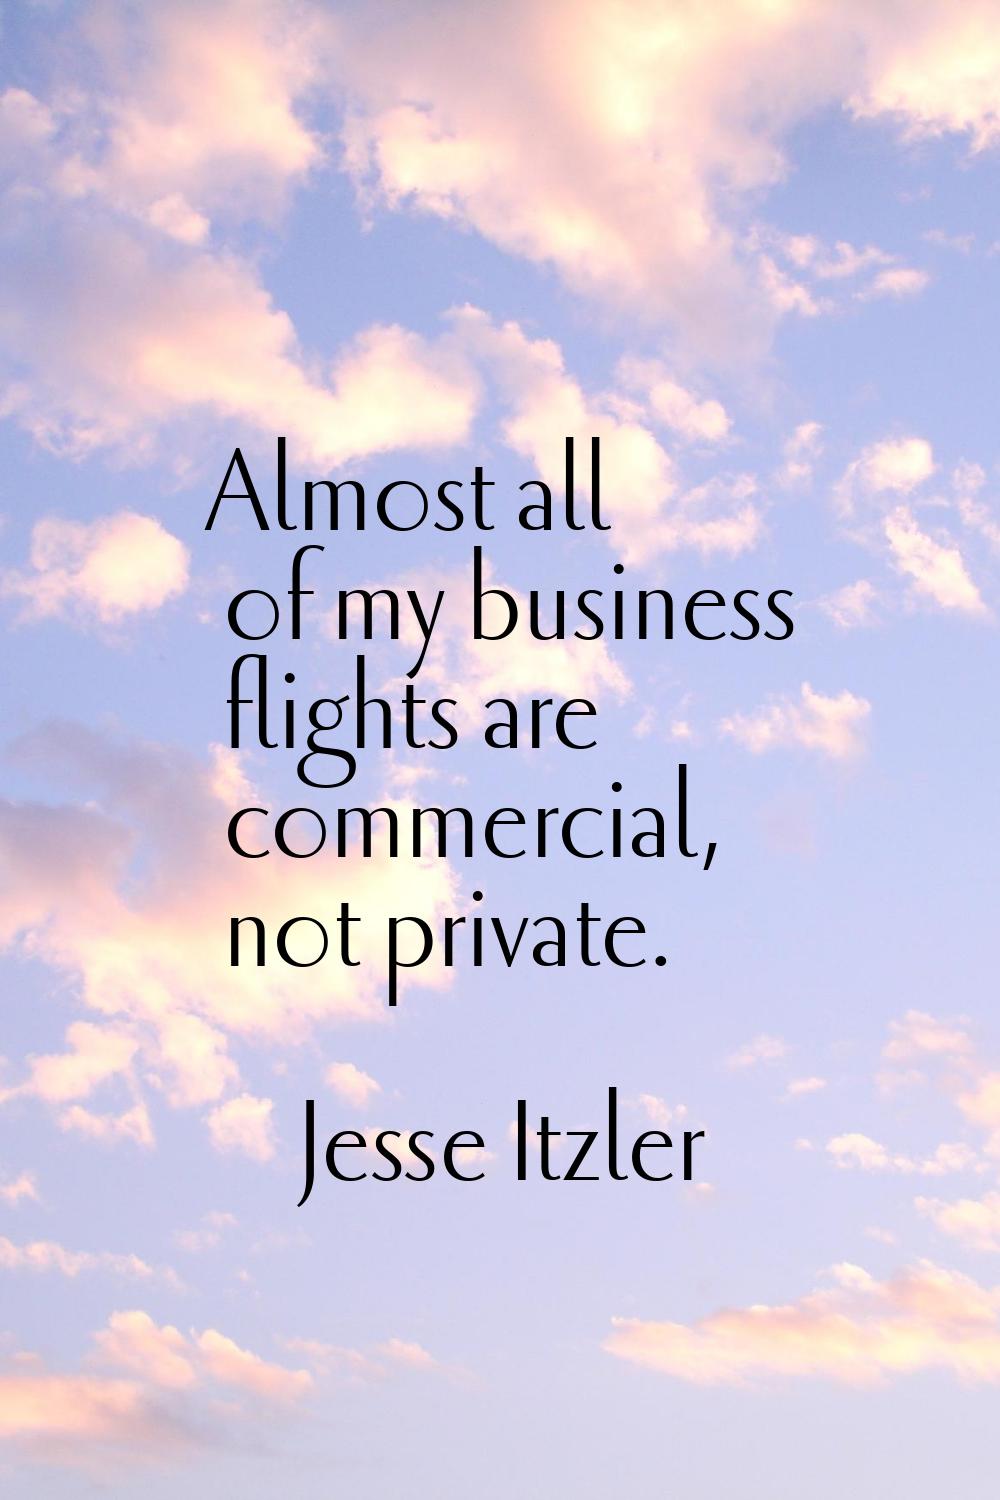 Almost all of my business flights are commercial, not private.